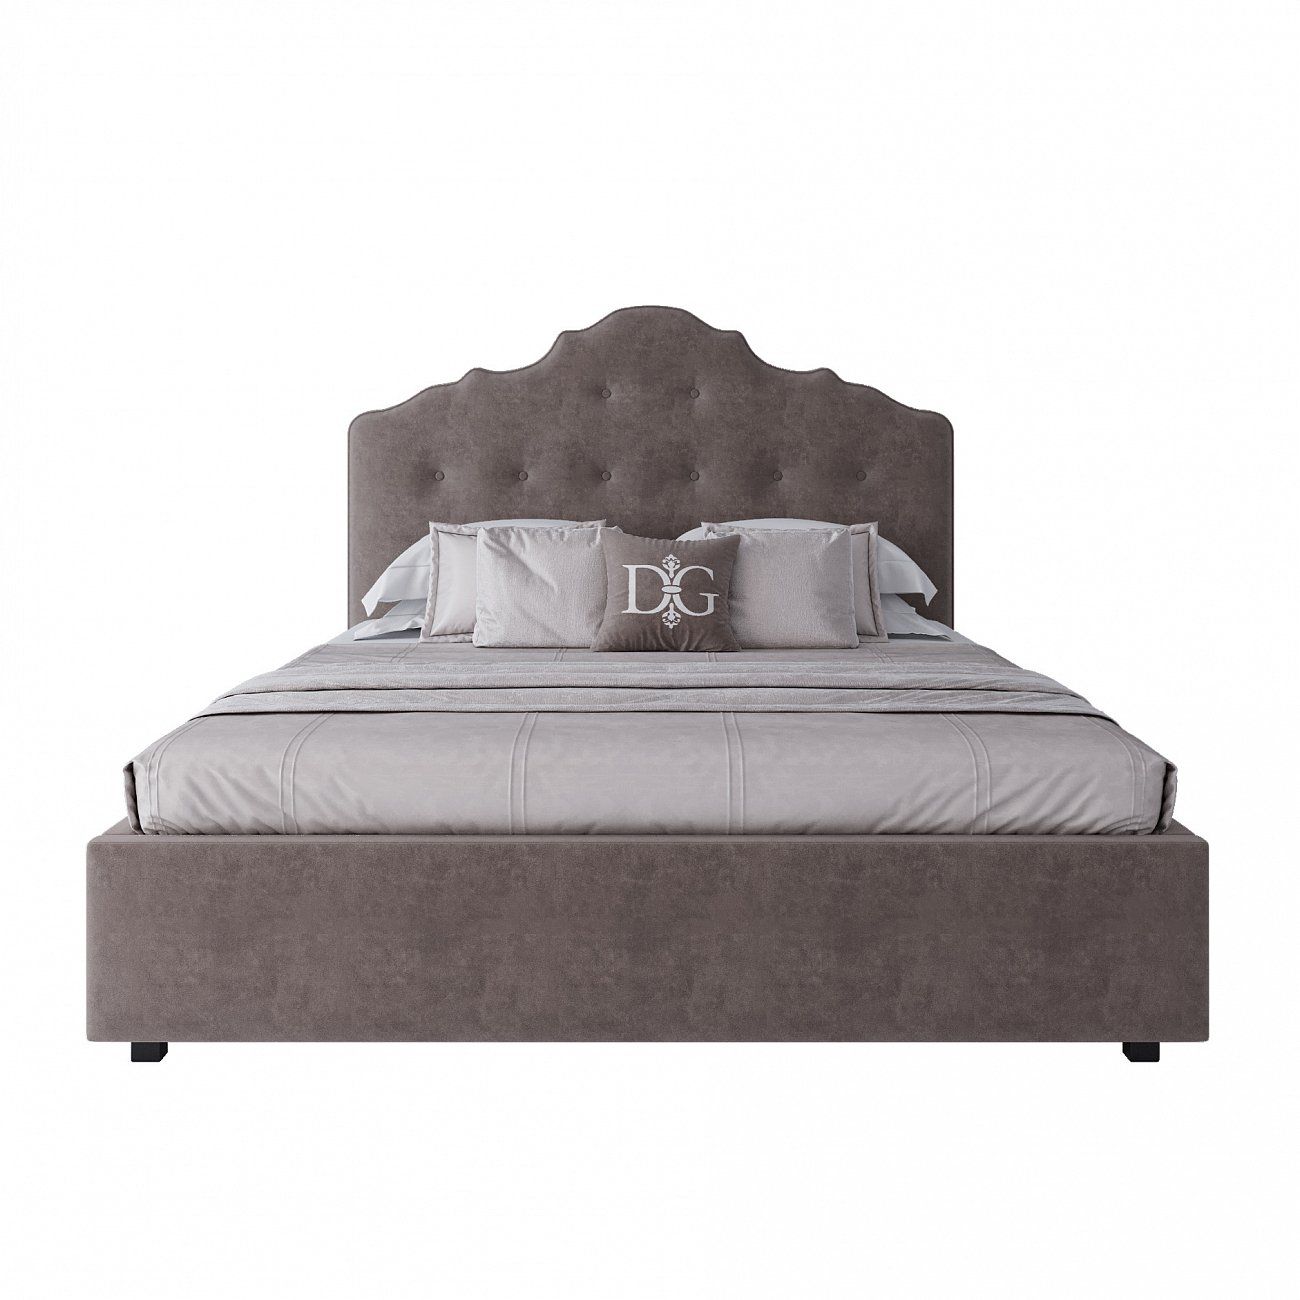 Double bed 160x200 grey-brown Palace